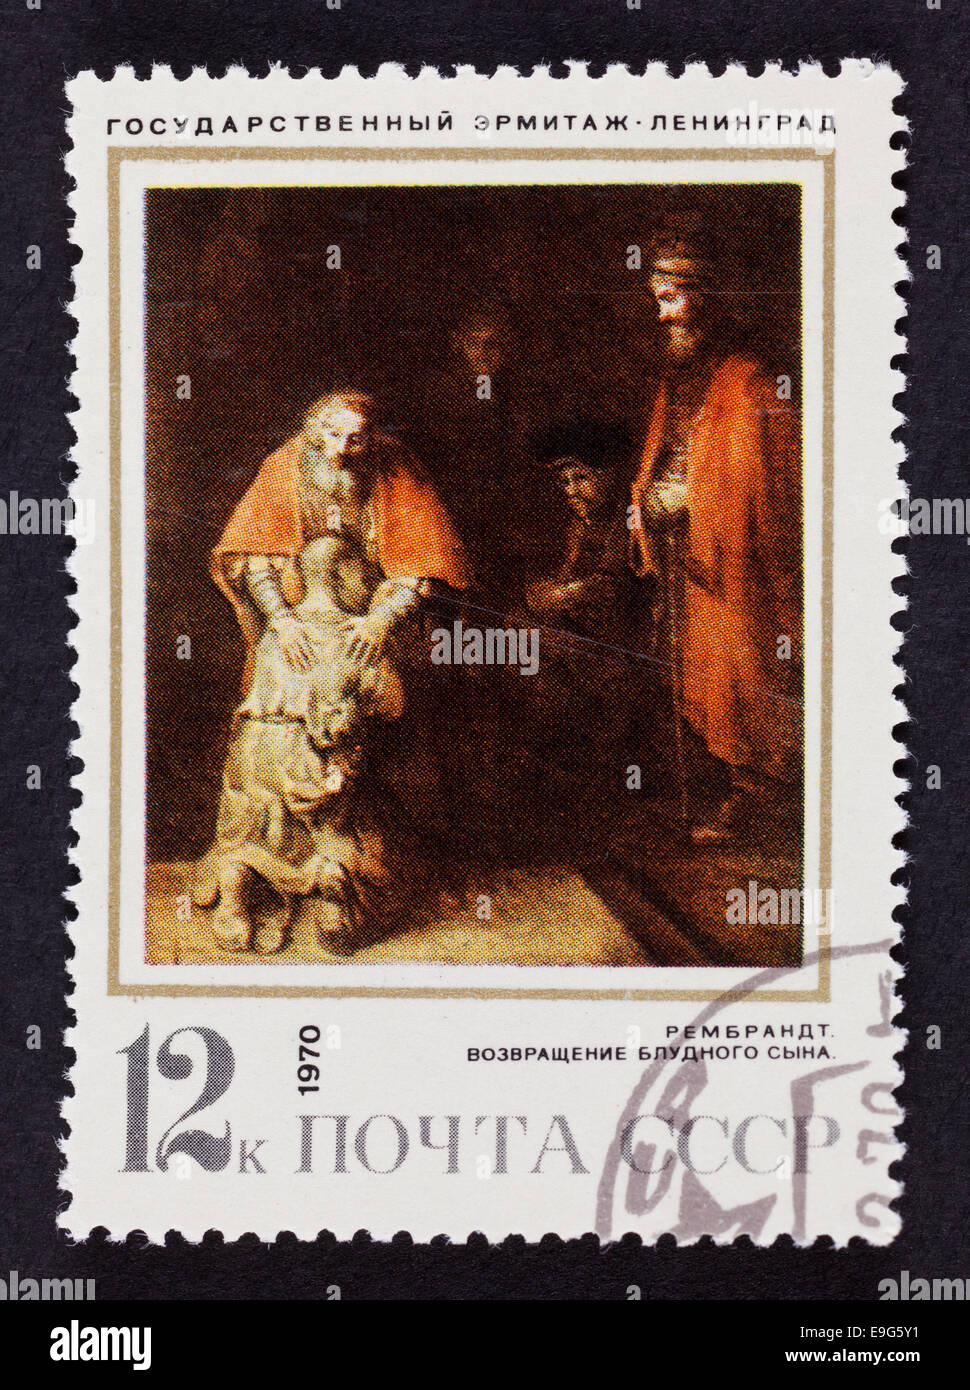 USSR postage stamp 'The Return of the Prodical Son' by Rembrandt. 1970 year. Black background. Stock Photo